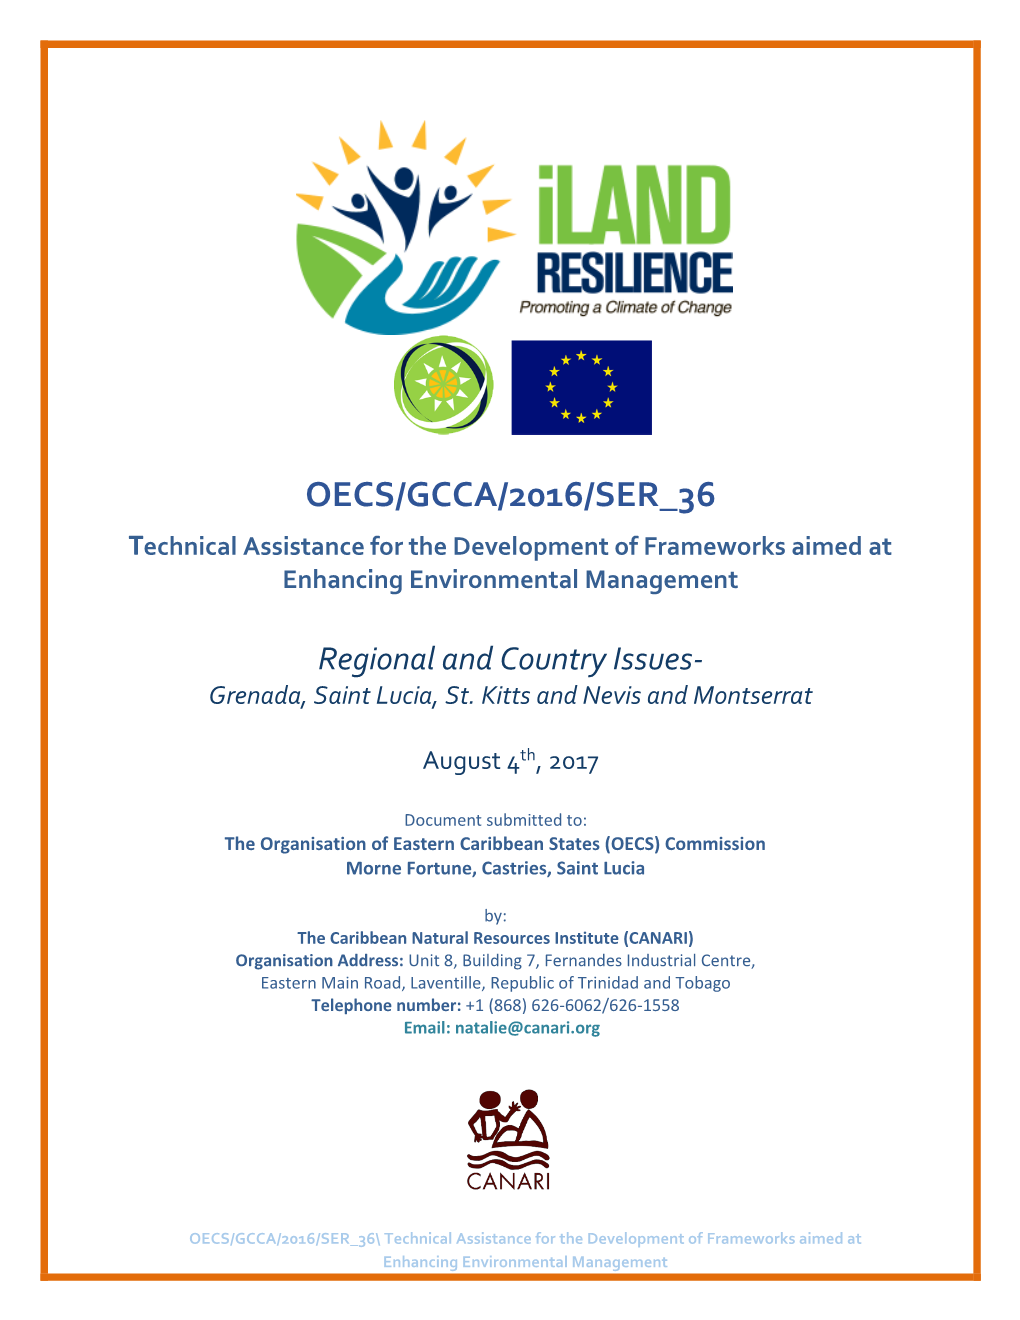 OECS/GCCA/2016/SER 36 Technical Assistance for the Development of Frameworks Aimed at Enhancing Environmental Management